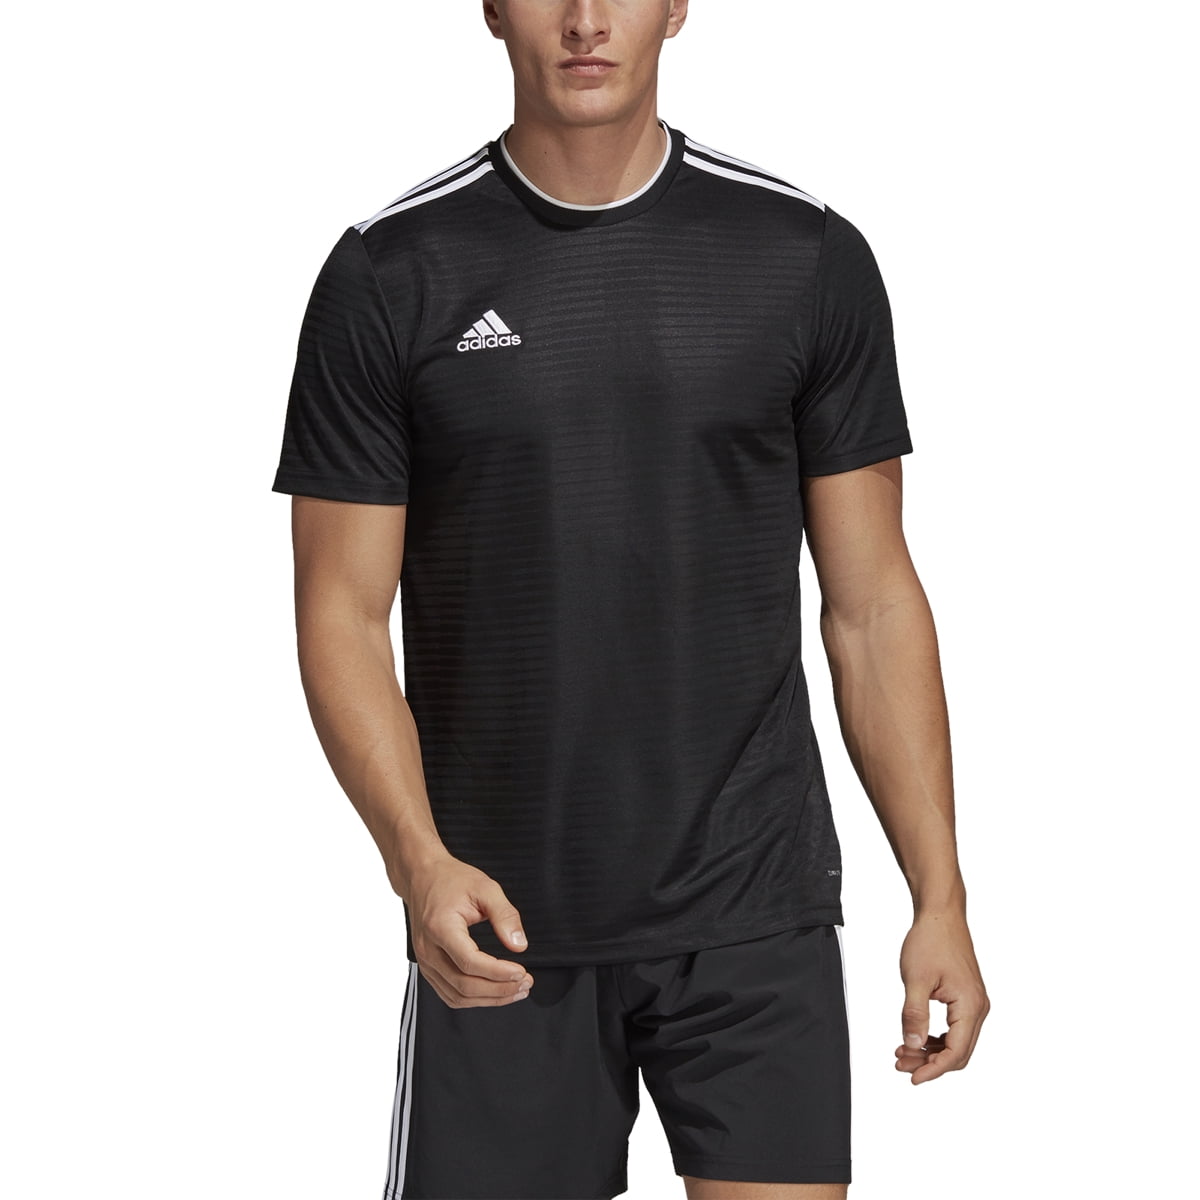 Adidas Condivo 18 Jersey Men's Soccer Adidas - Ships Directly From Adidas